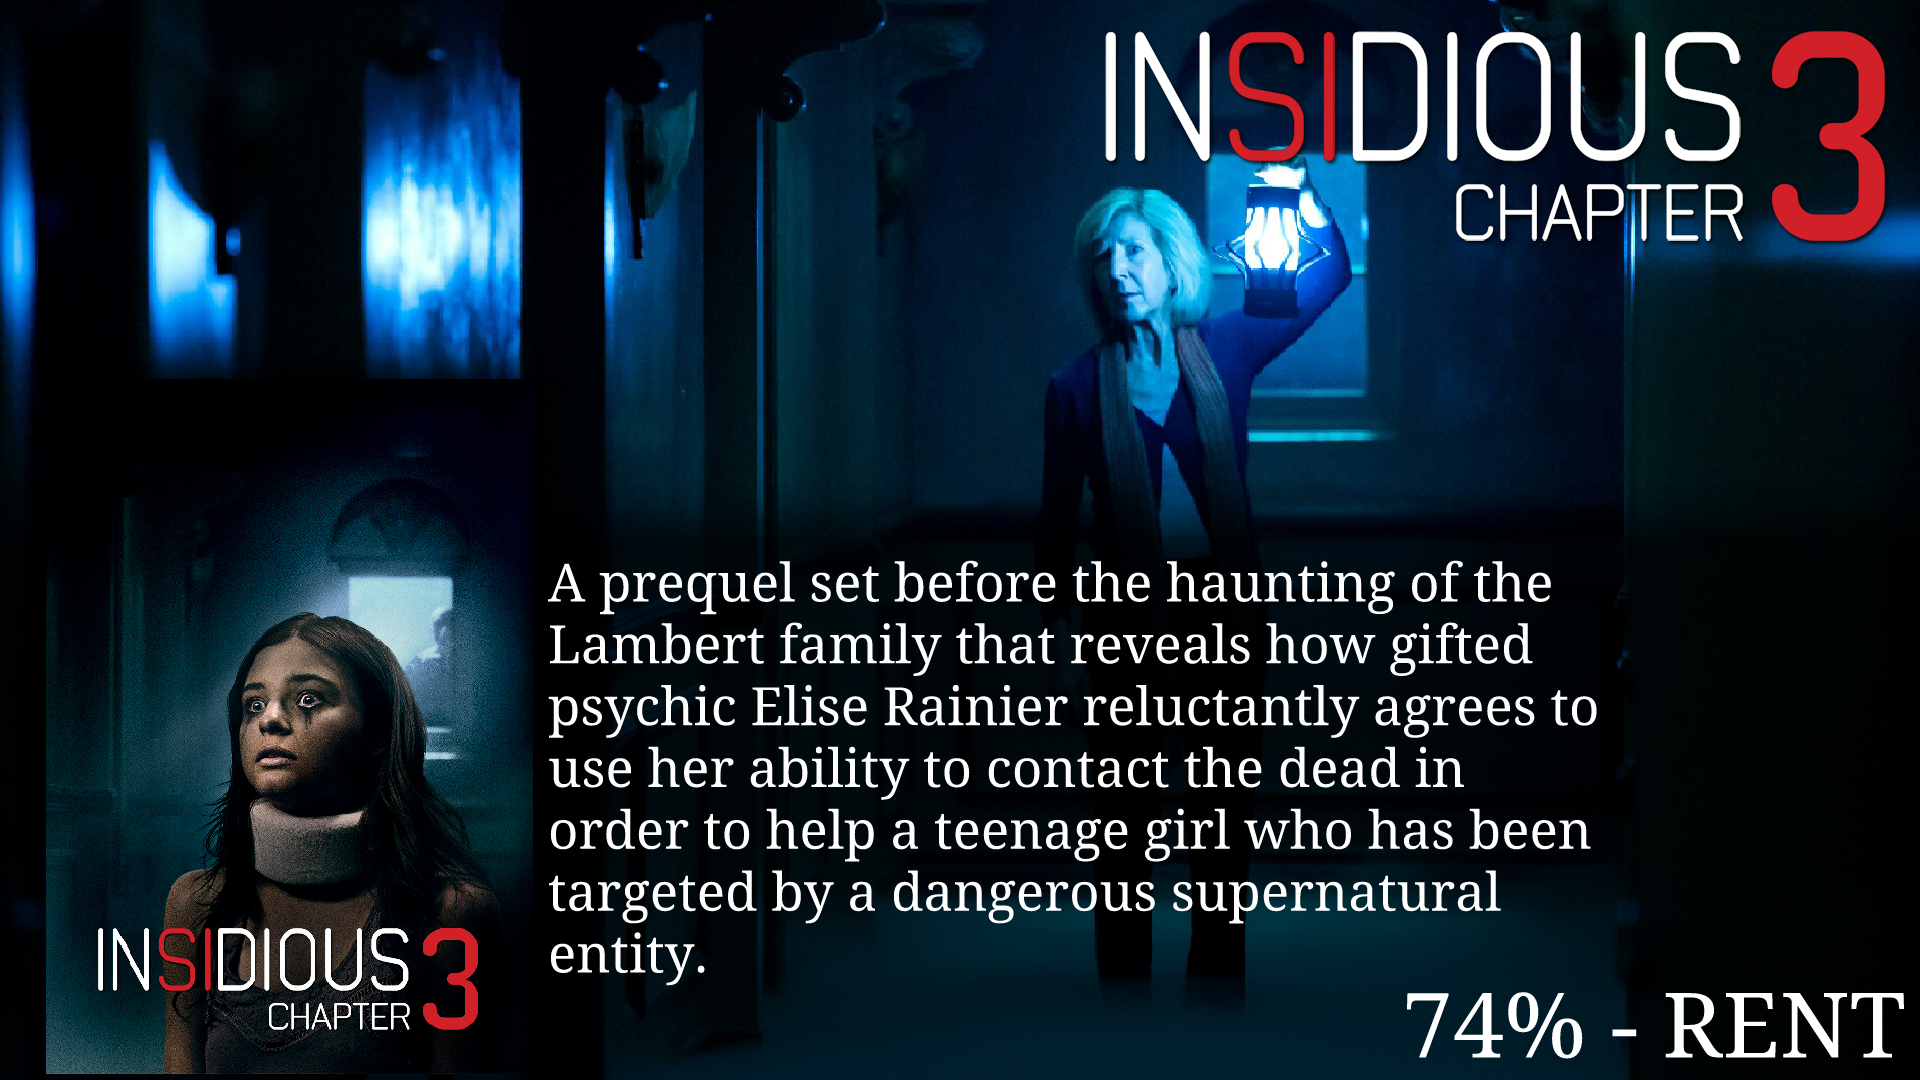 download film horor insidious chapter 2